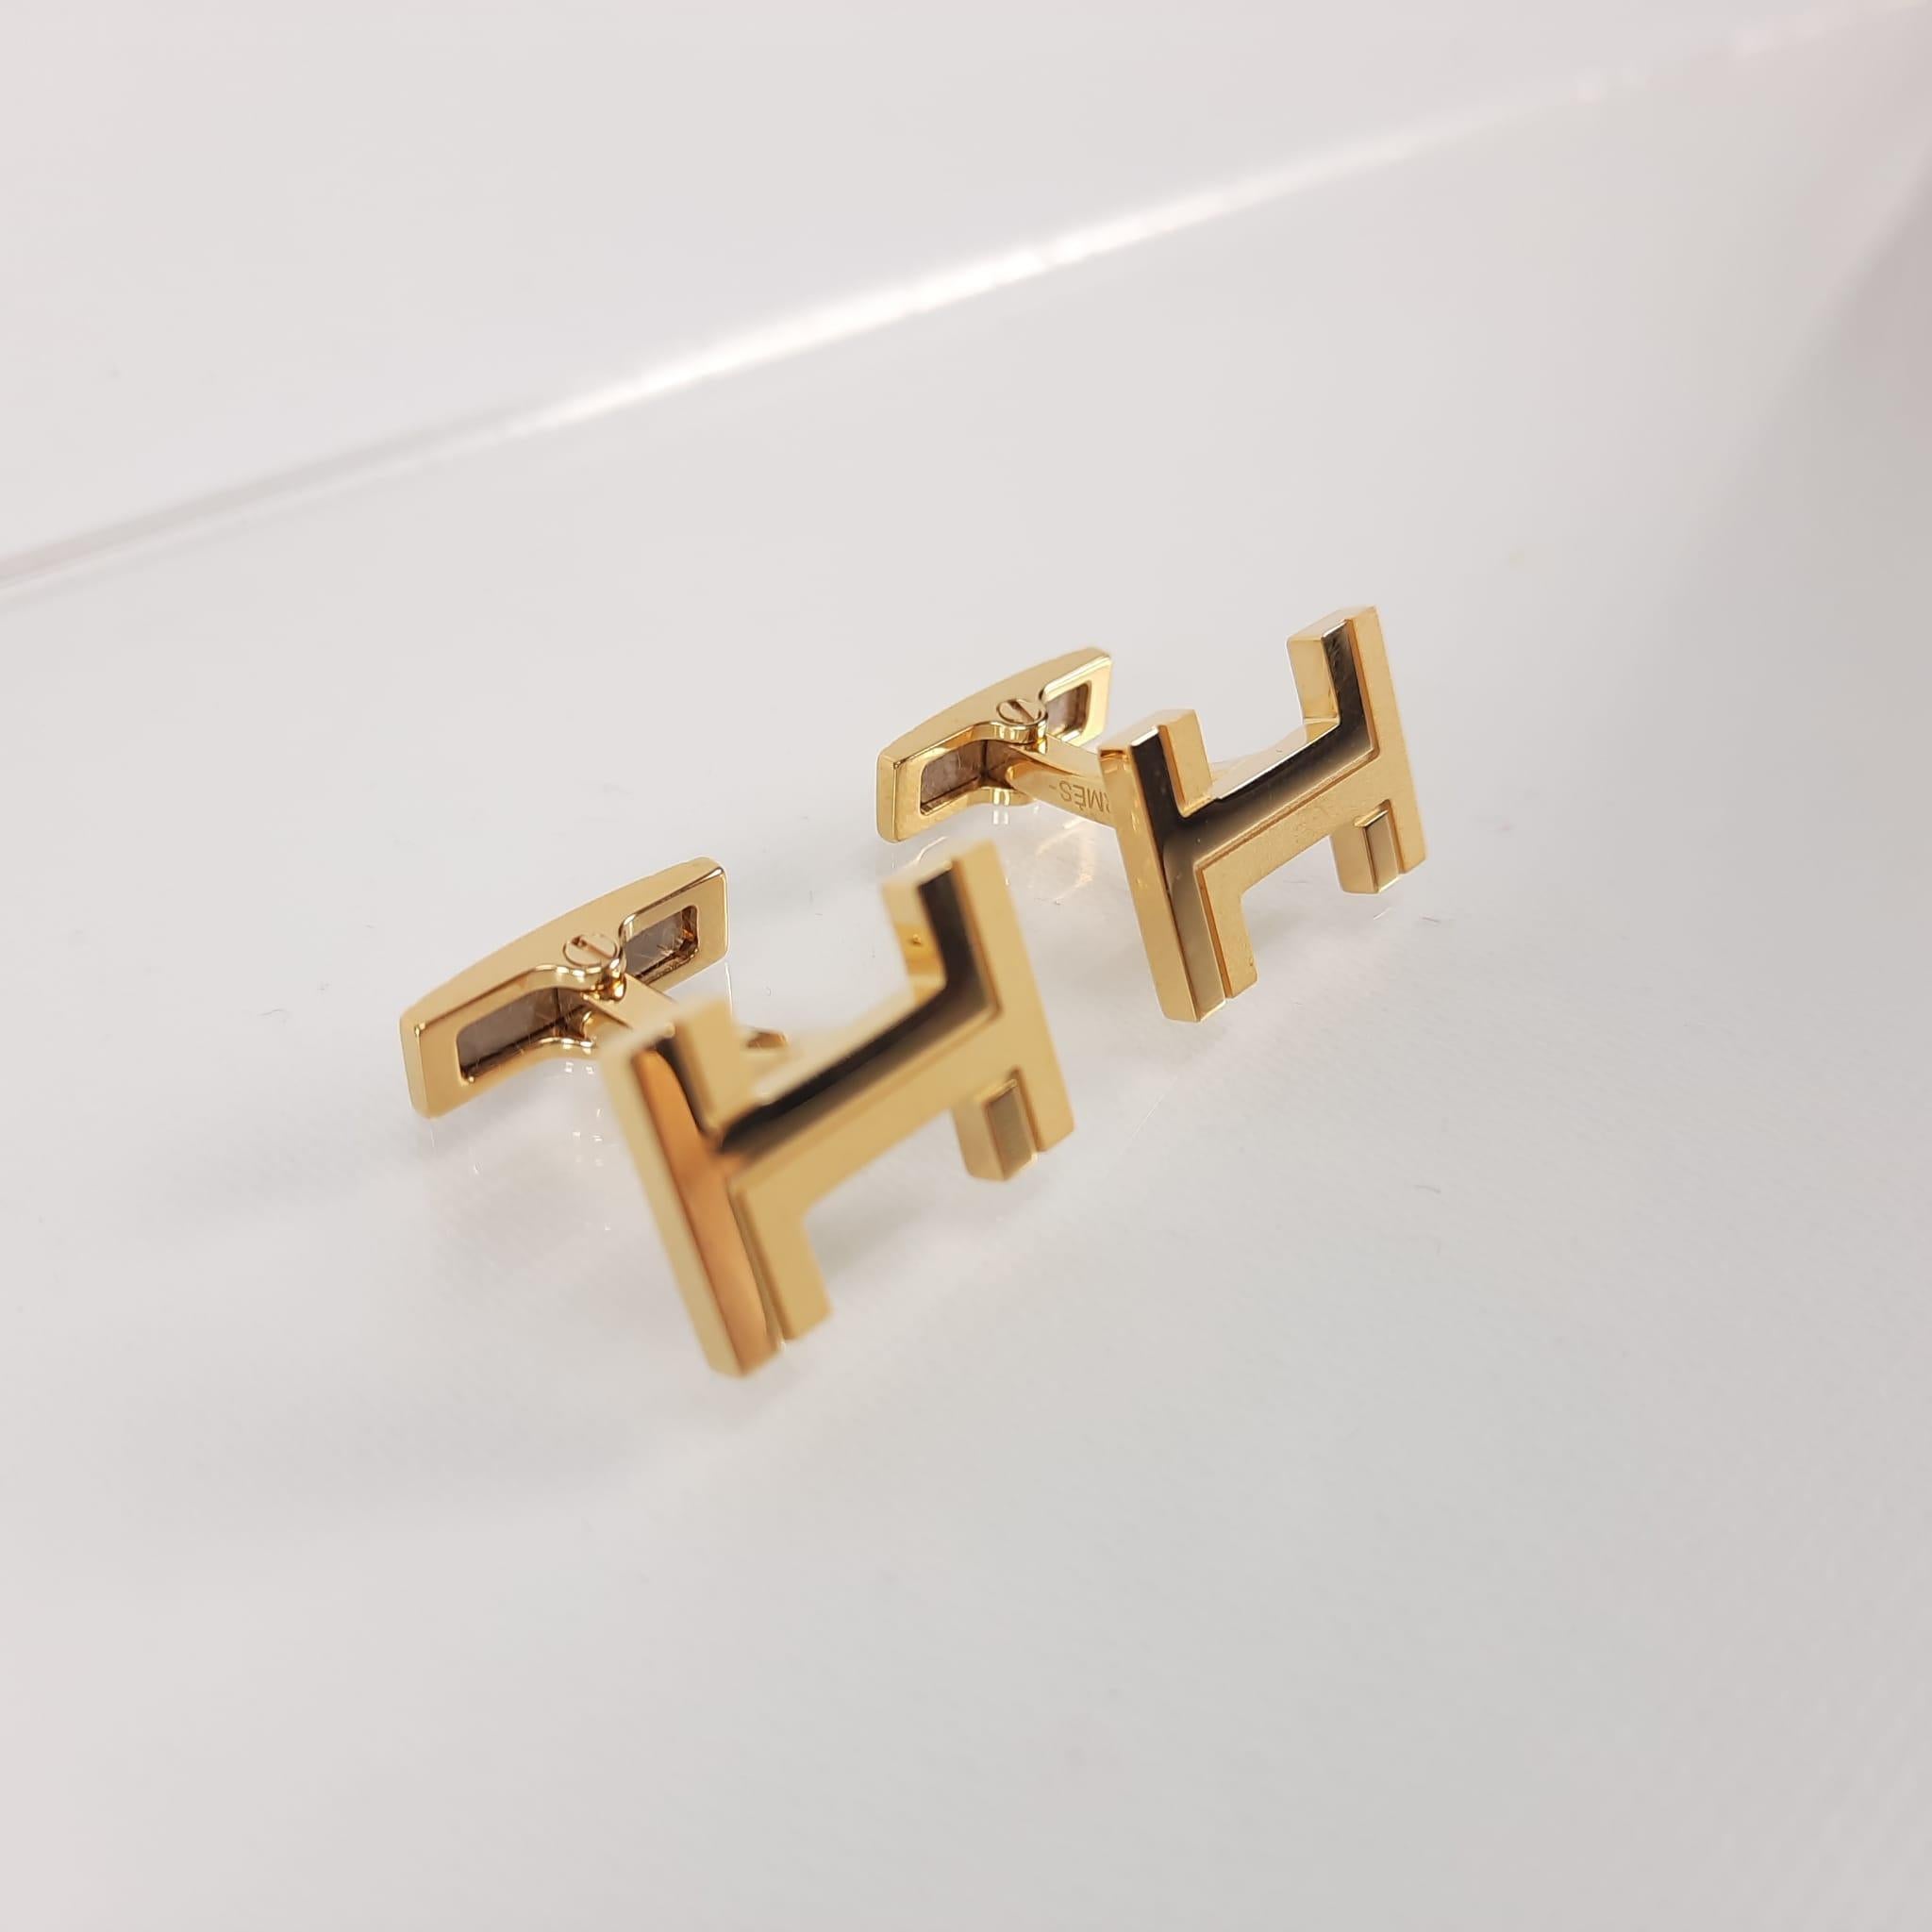 Cufflinks in metal with cold gold-plated hardware.
Made in France
Height: 1.2 cm
Width: 1.8 cm